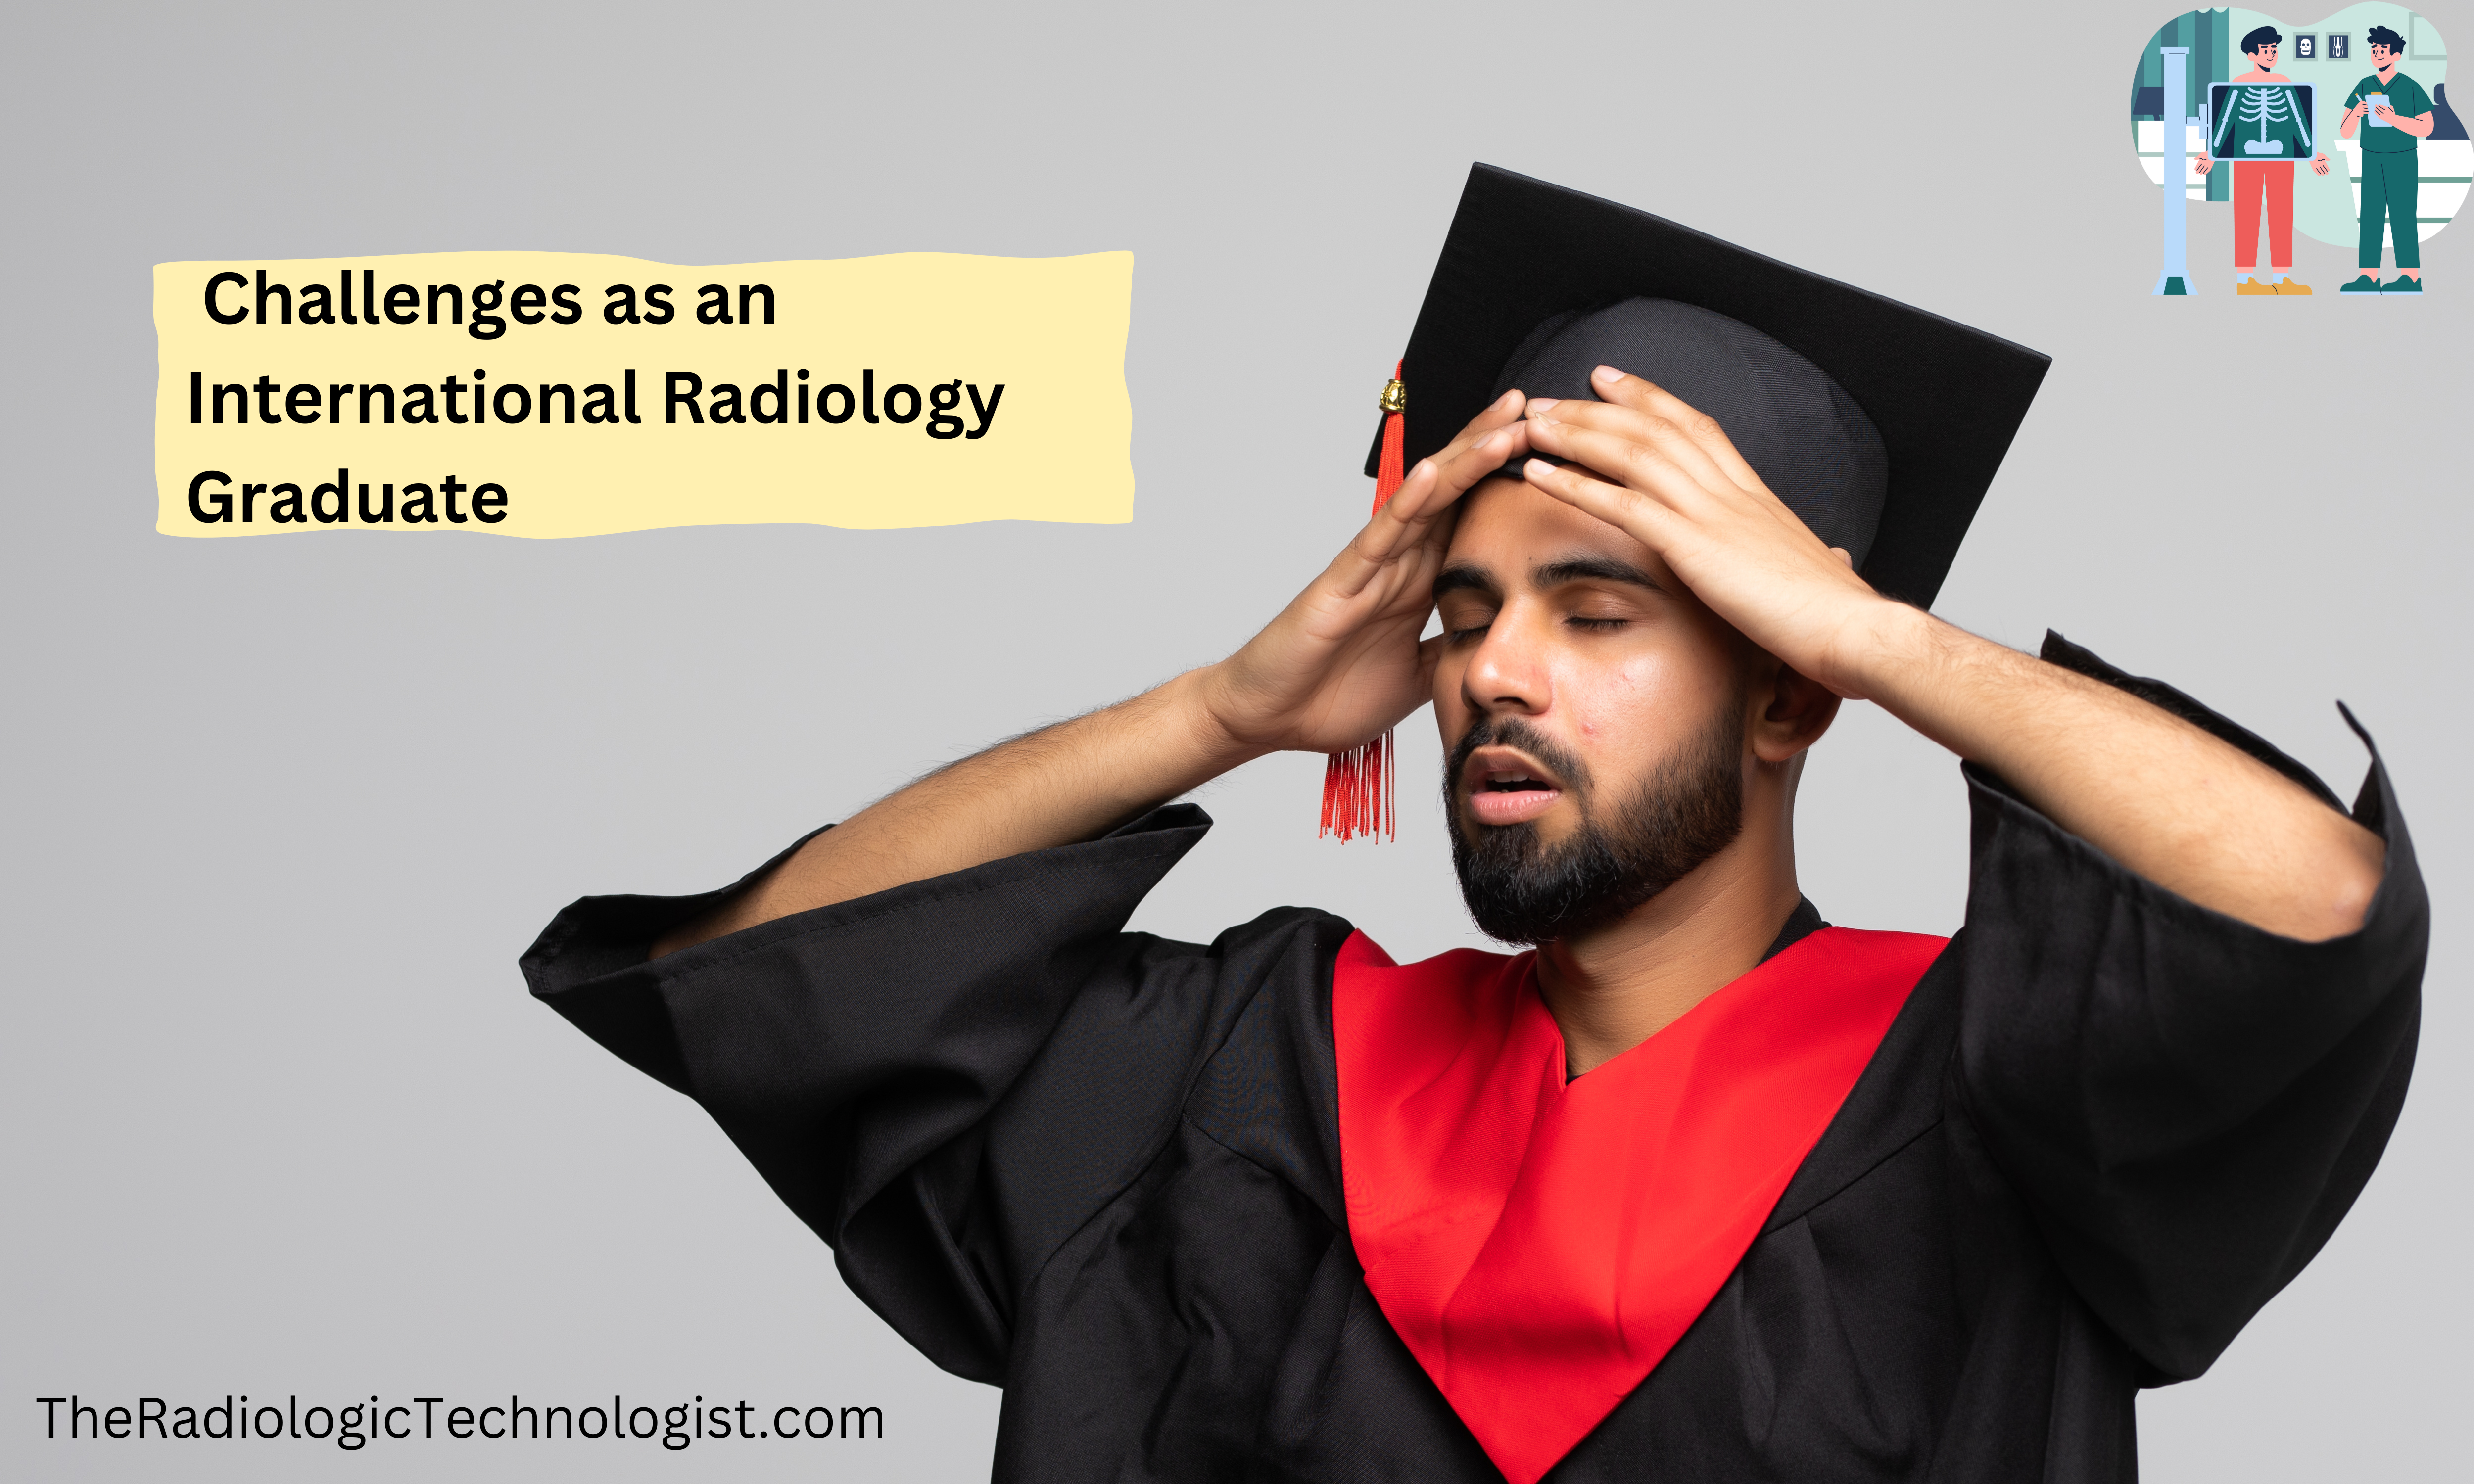 Qualification Challenges as an International Radiology Graduate